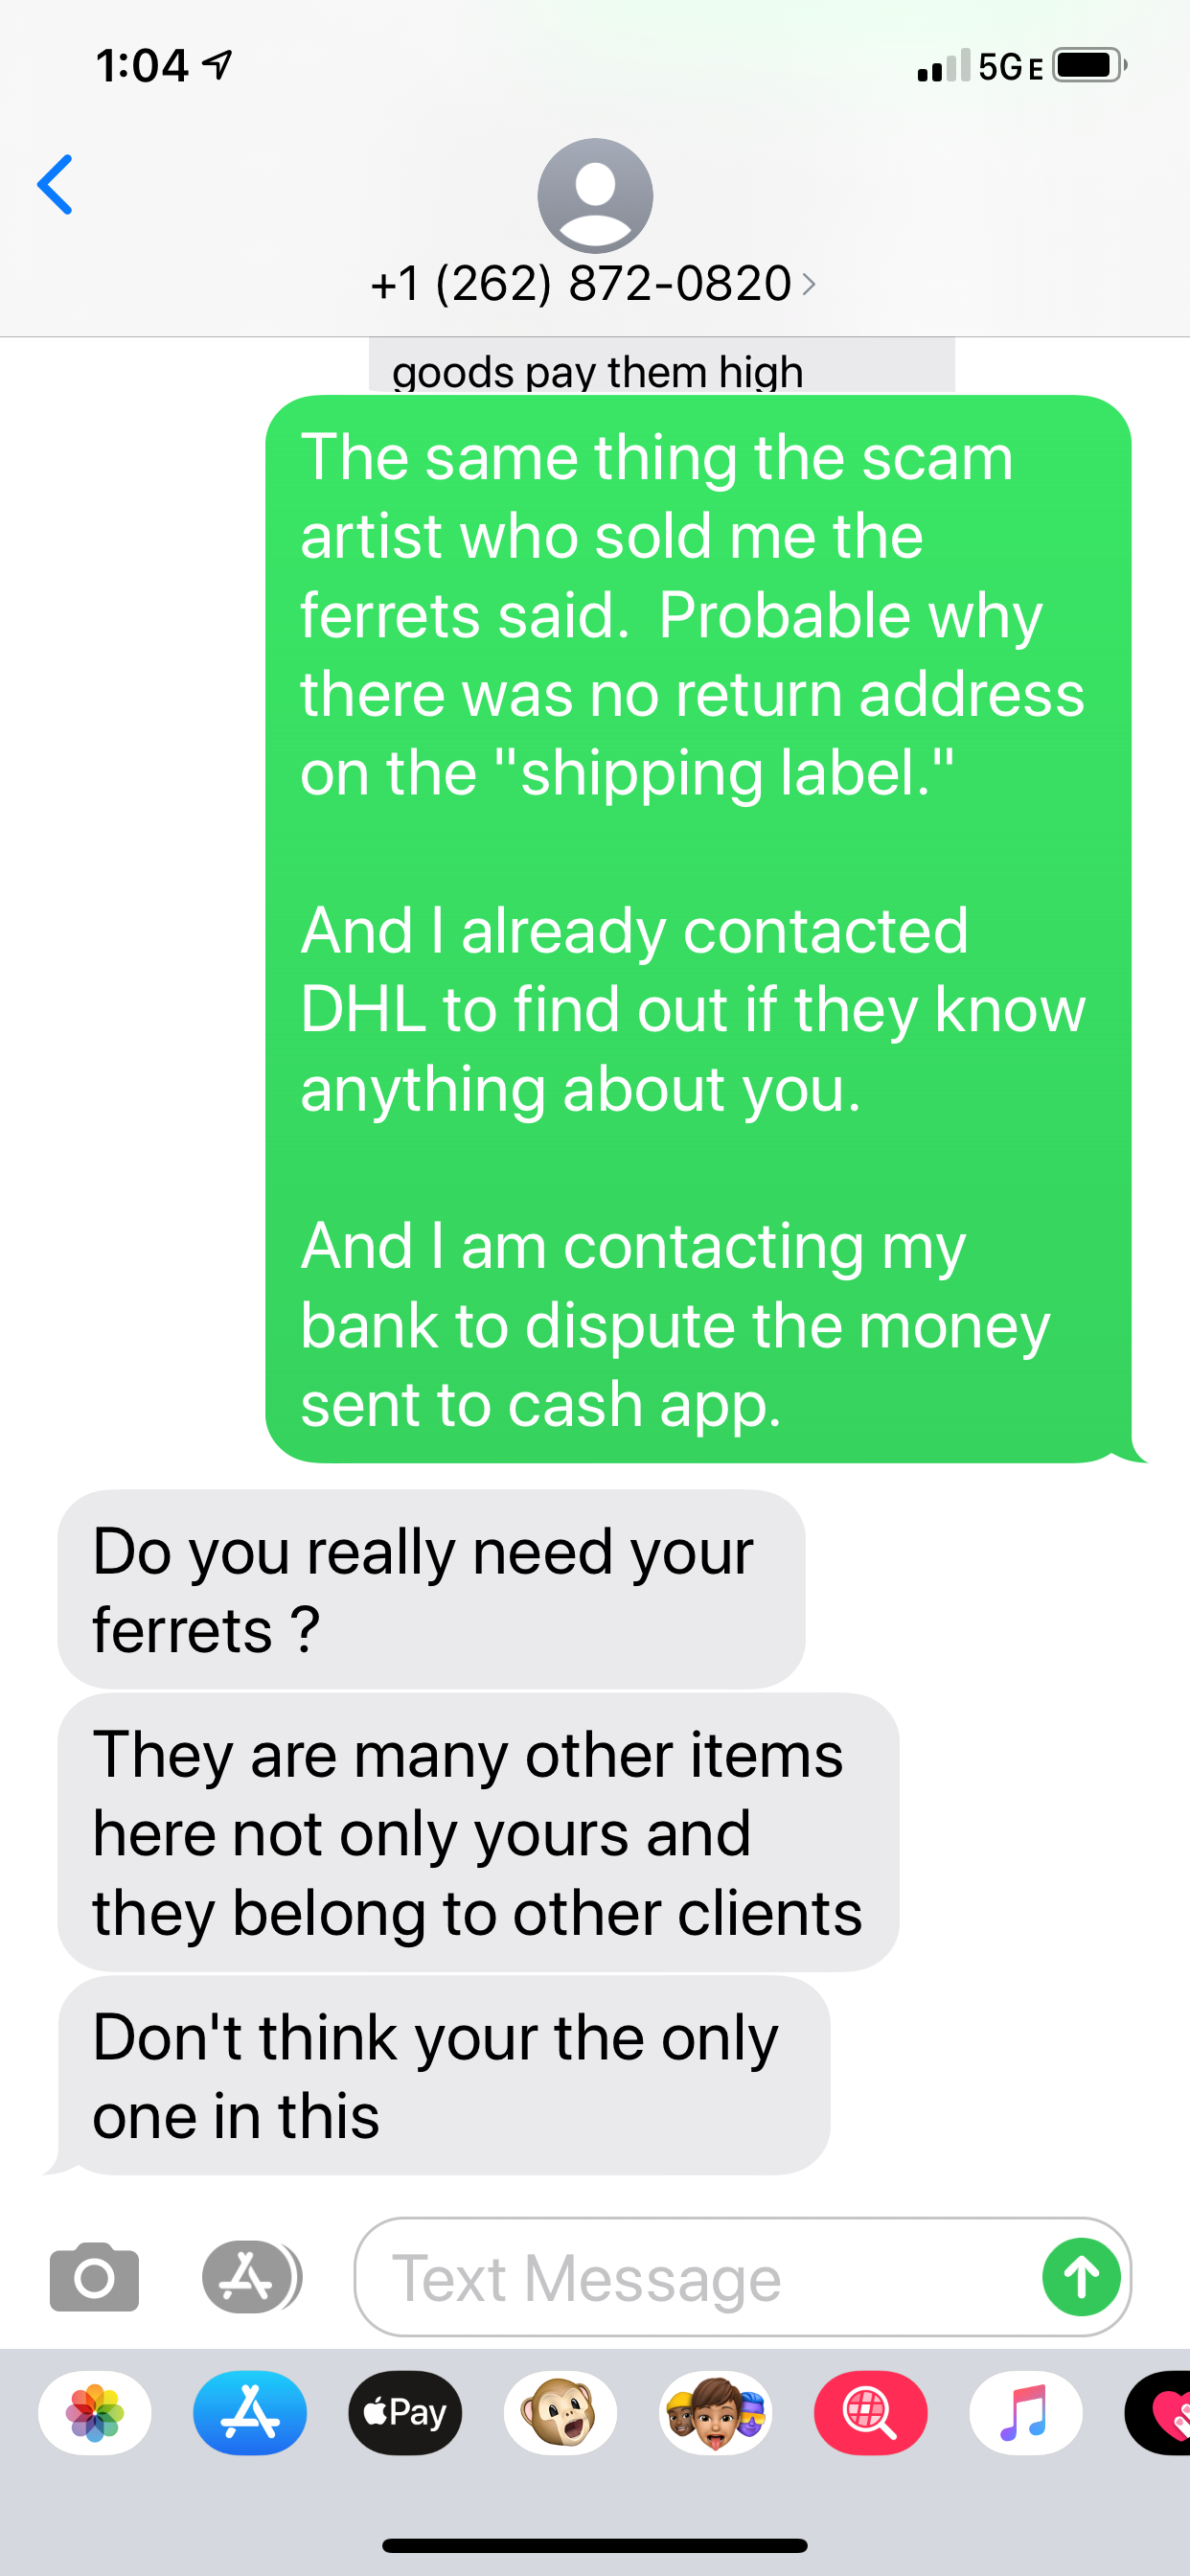 "Shipper" Do You Really Need Your Ferrets?